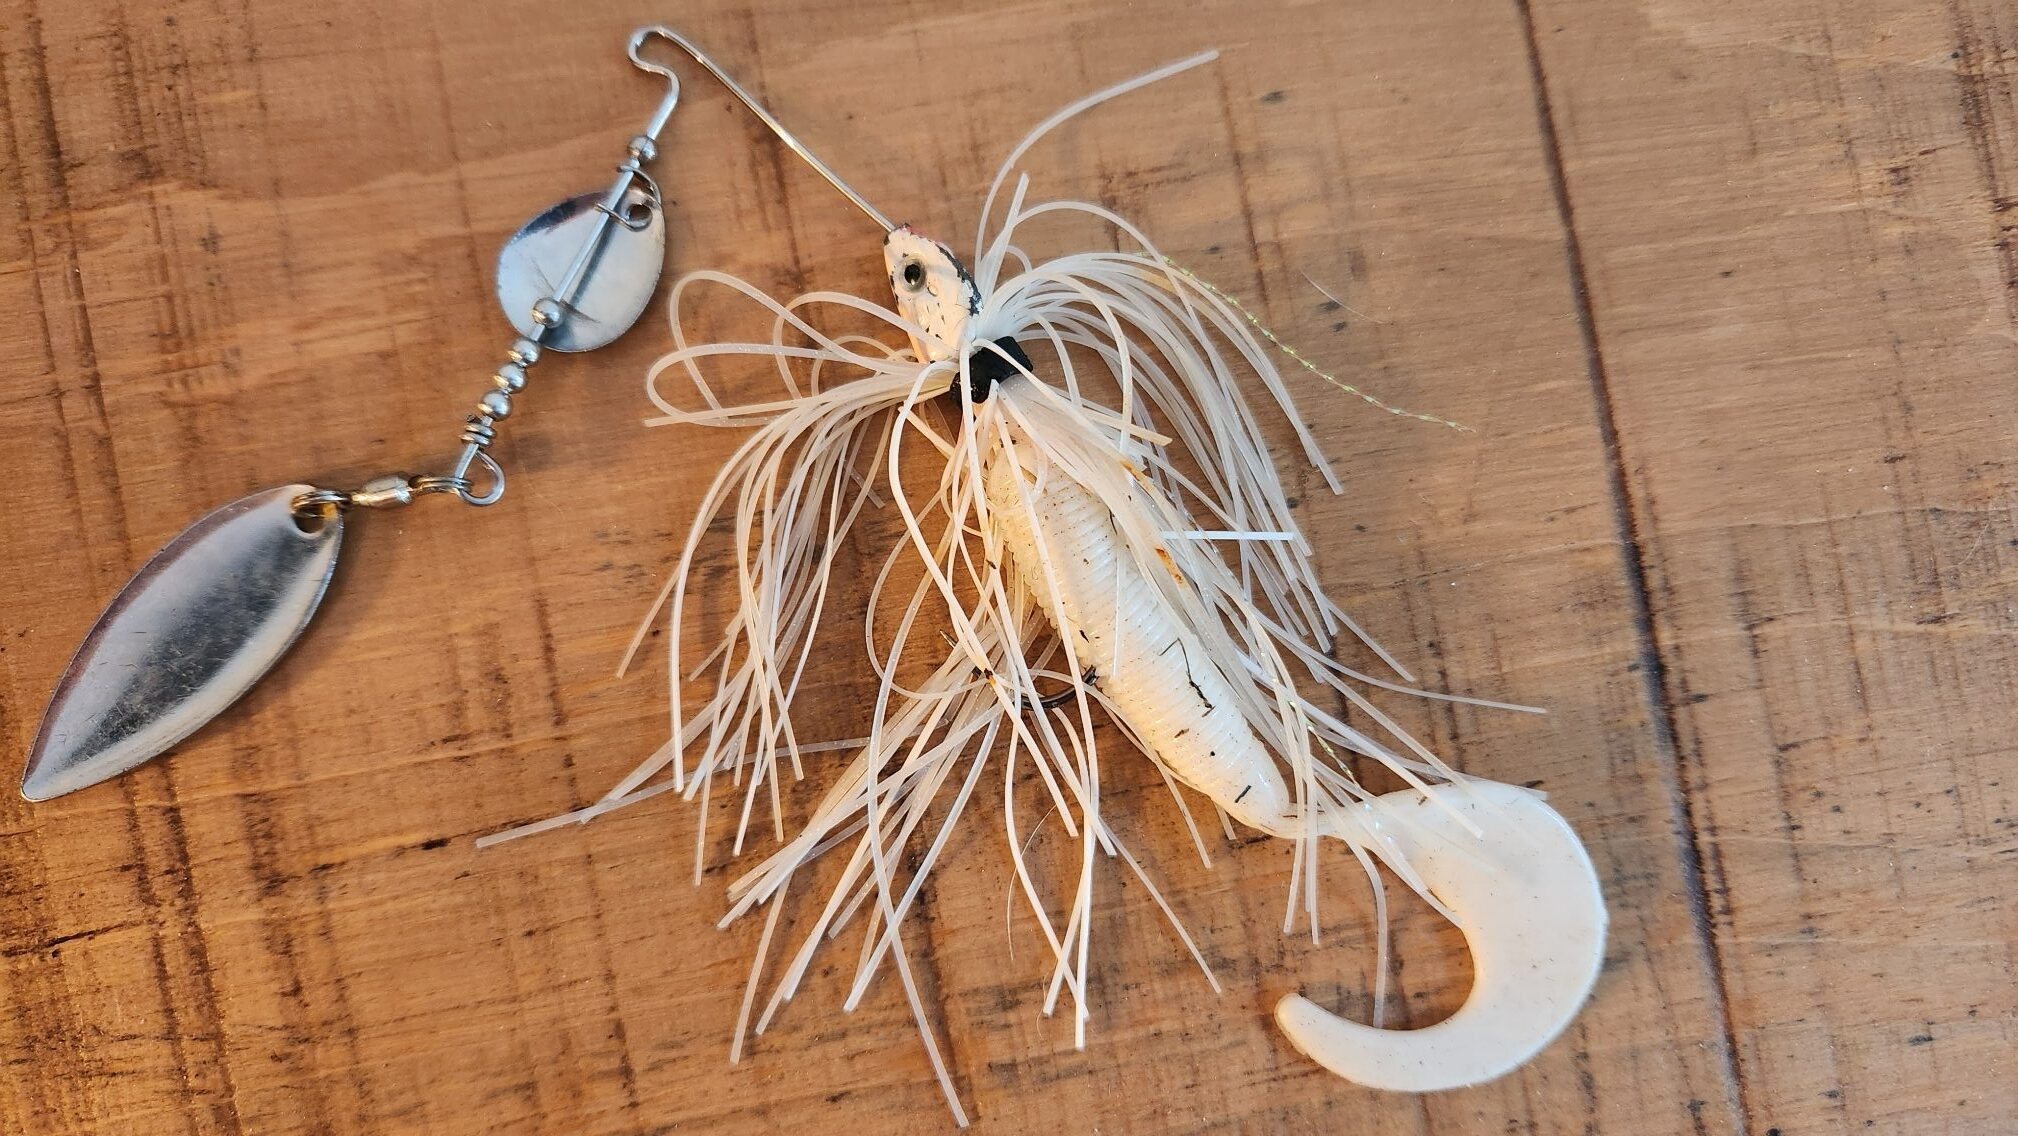 Spinnerbait with Colorado and Willow Leaf spoons. White skirt and swimming fish leader.